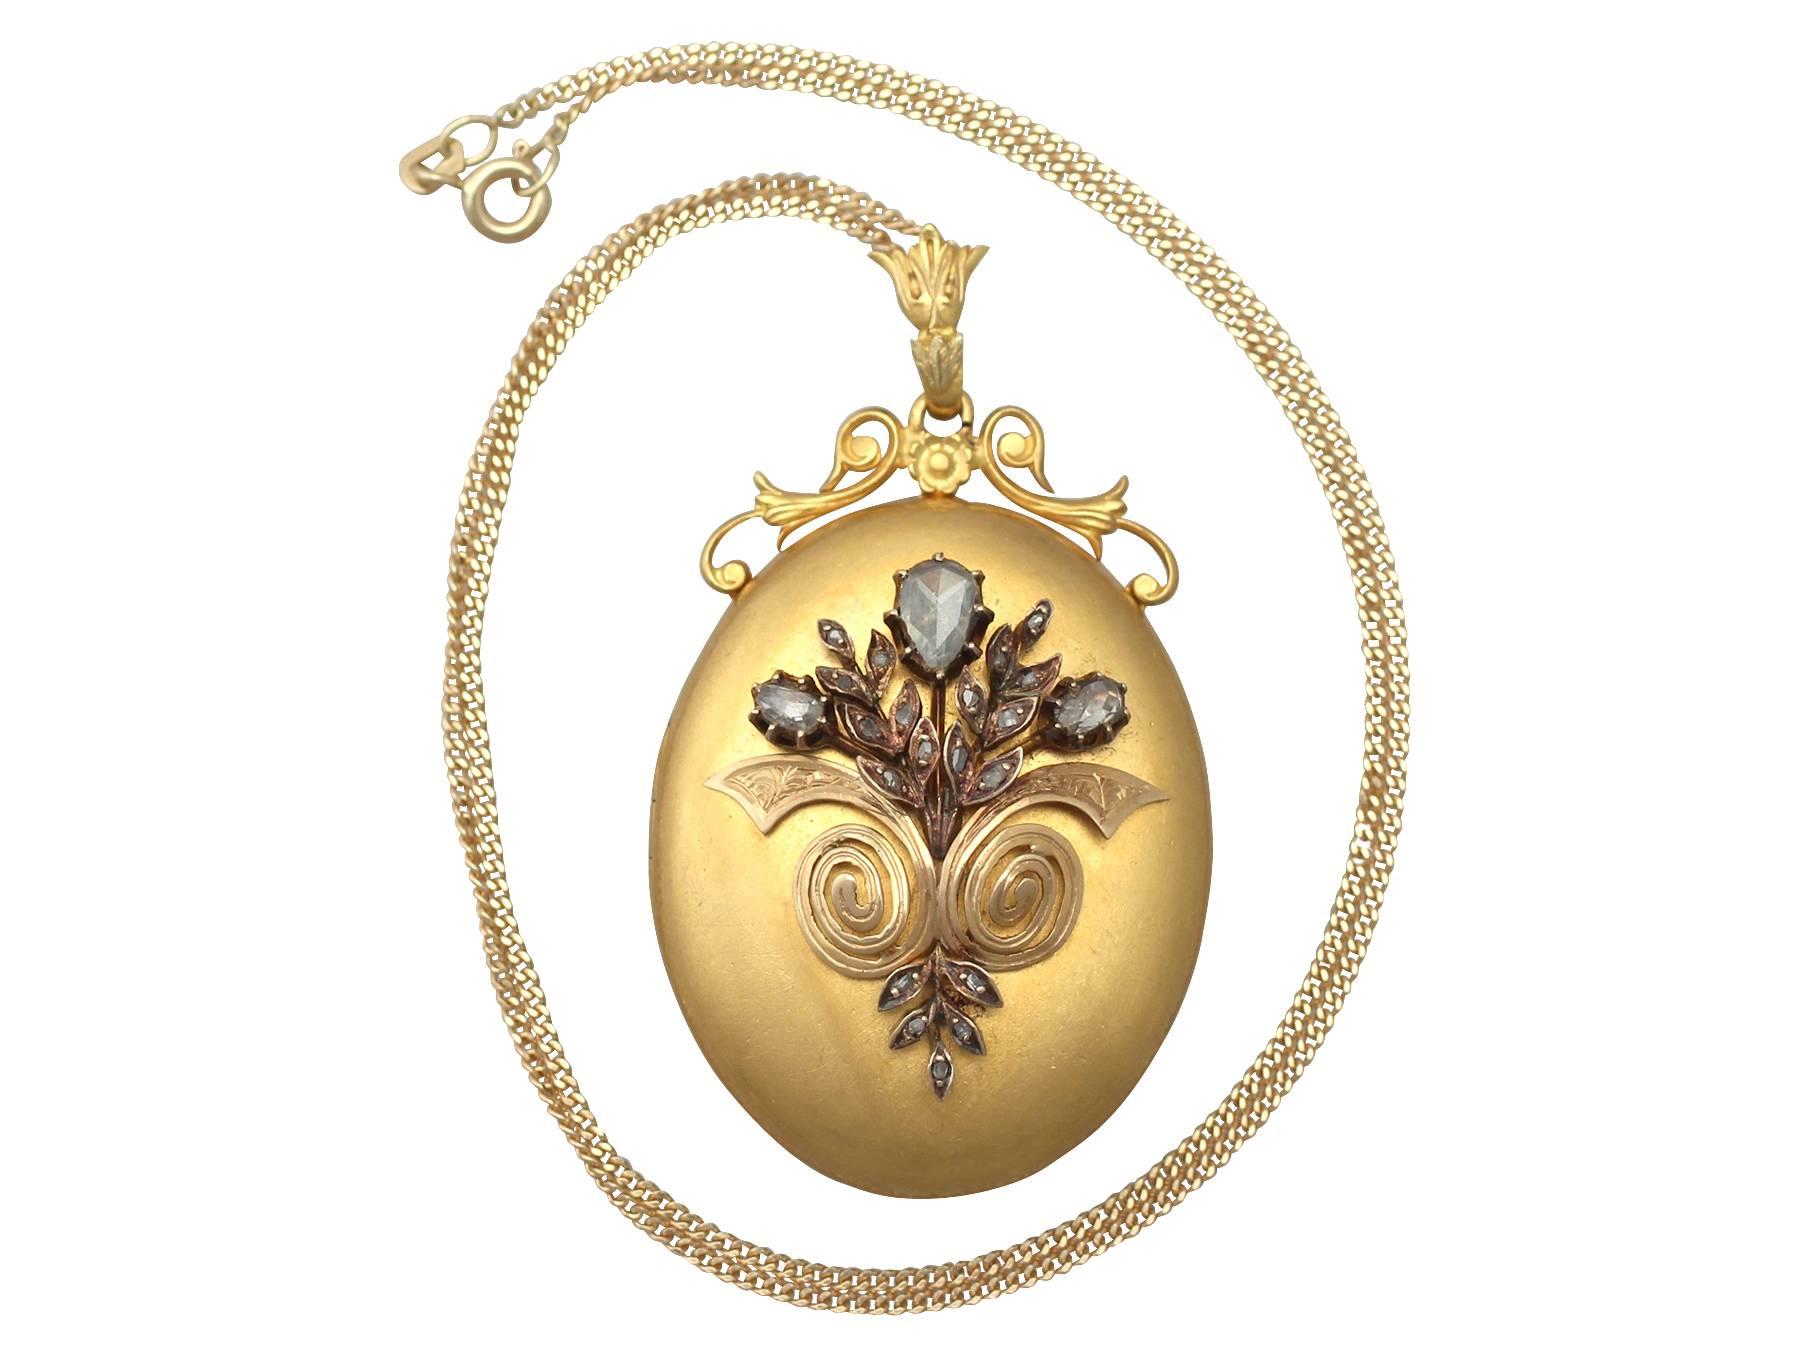 An exceptional and impressive antique French 0.82 carat diamond and 18k yellow gold locket; part of our antique jewellery and estate jewelry collections

This exceptional, fine and impressive antique diamond locket has been crafted in 18k yellow